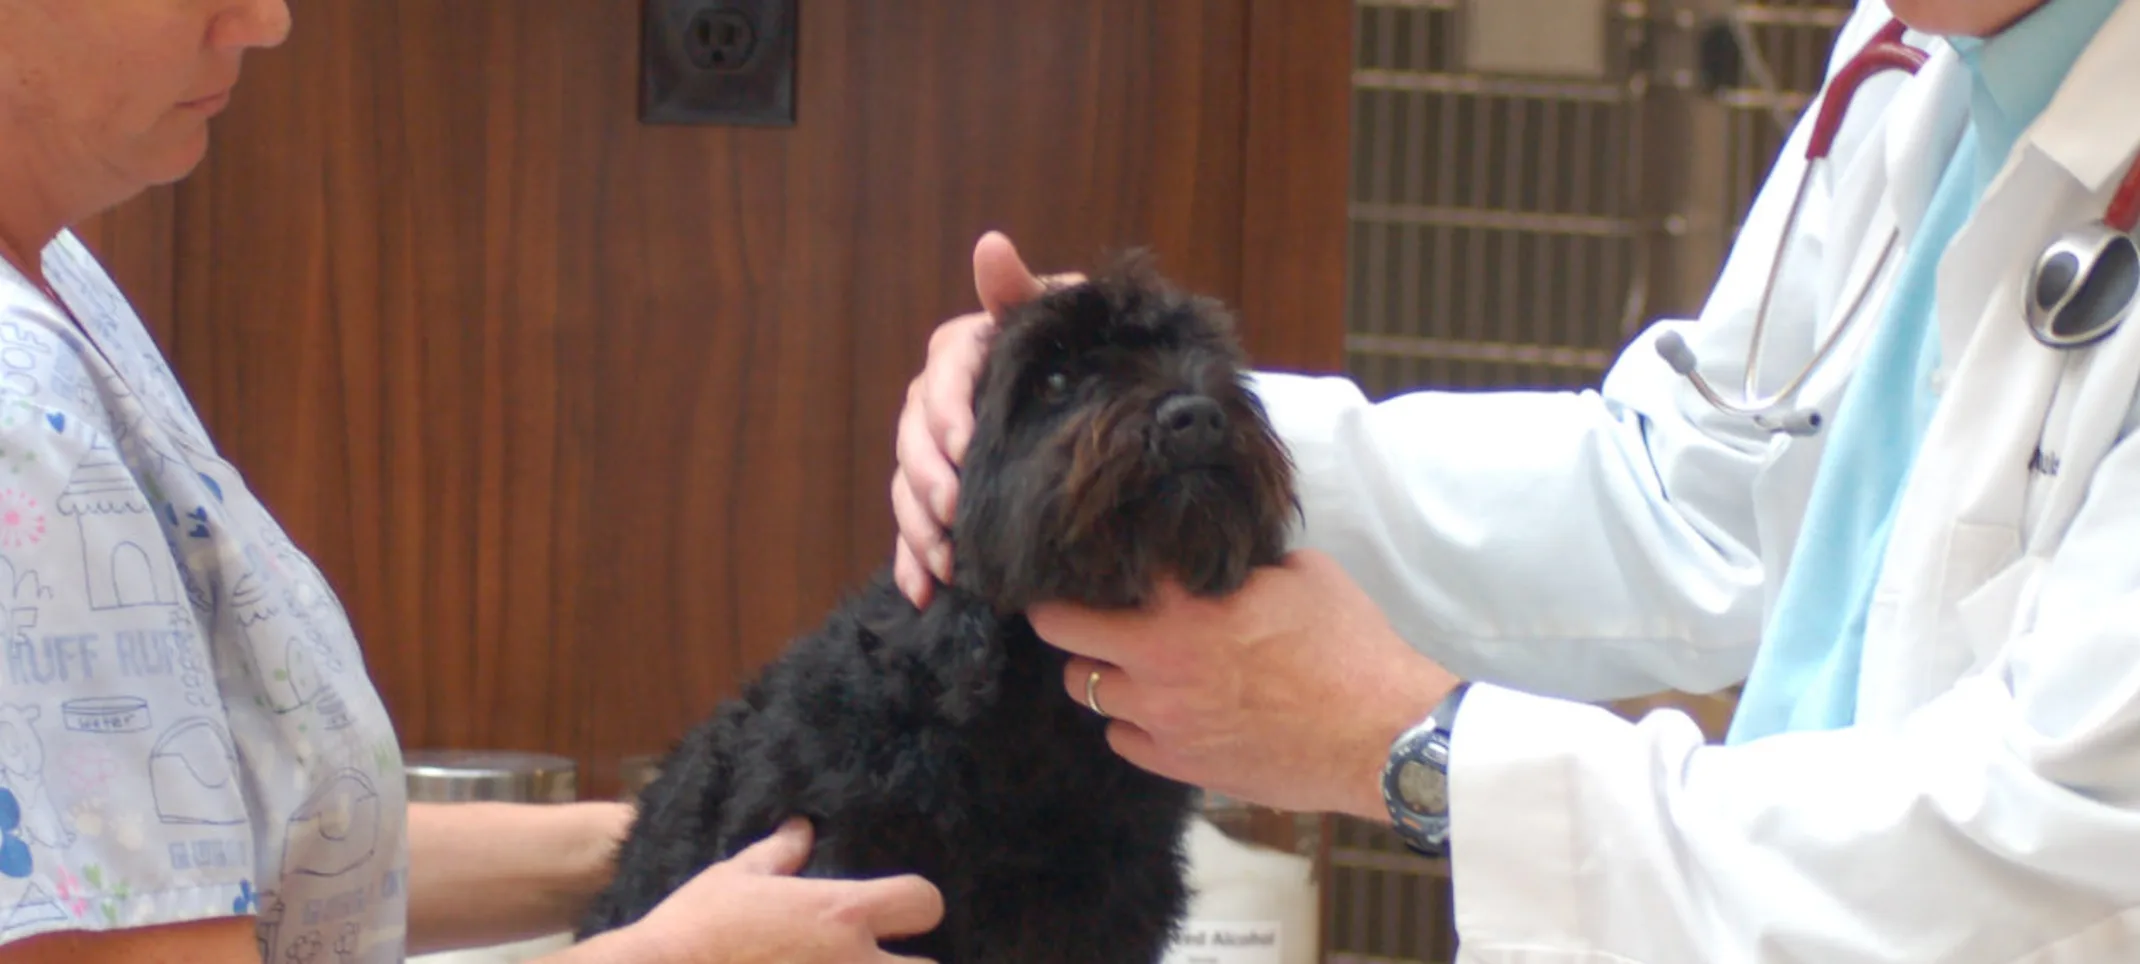 Doctor and staff member caring for a black dog on a table